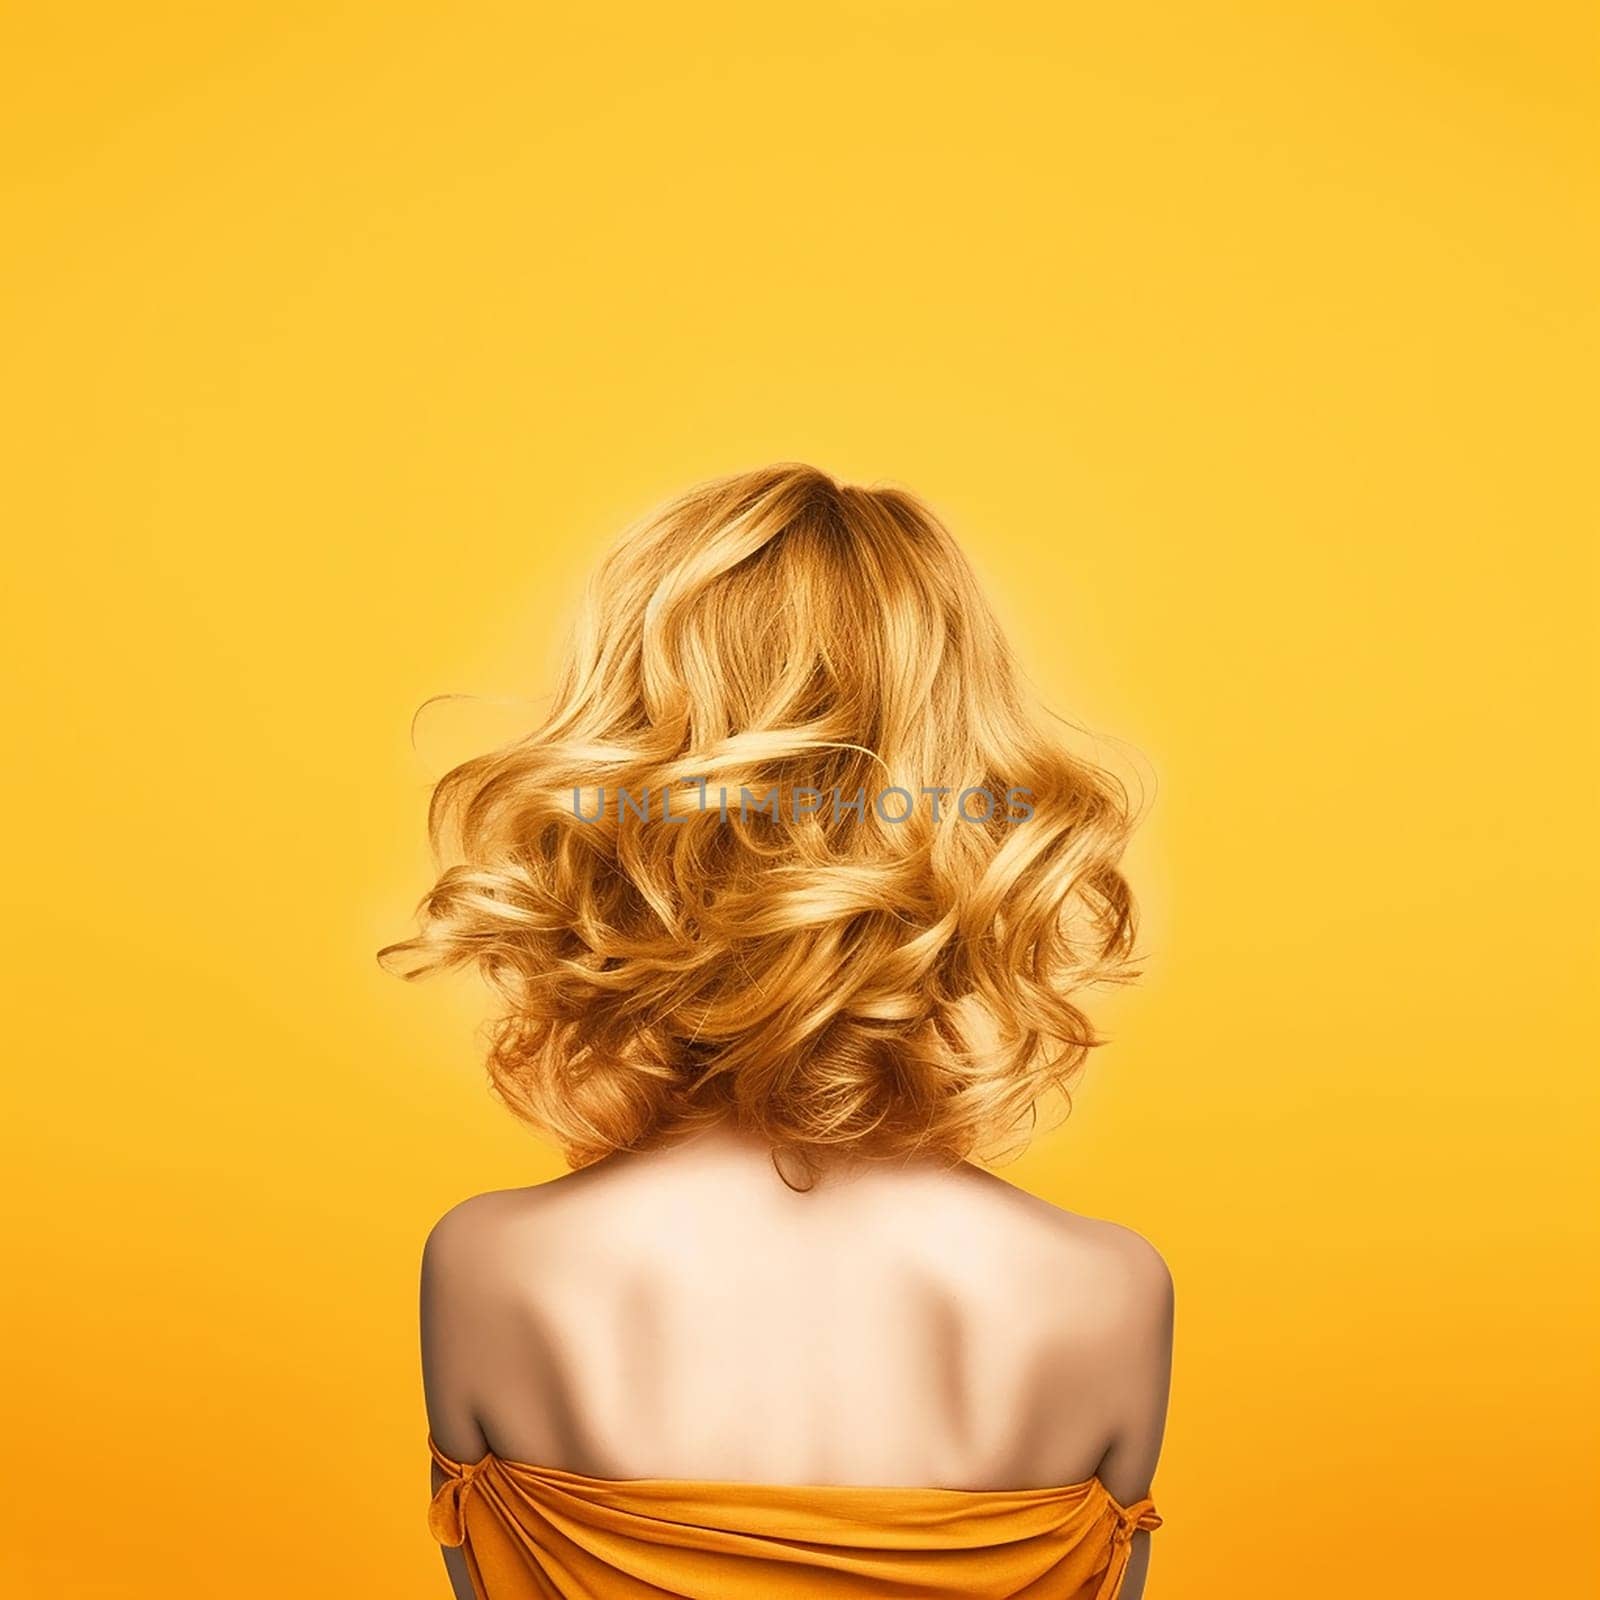 Blond woman with curly hair against a yellow background